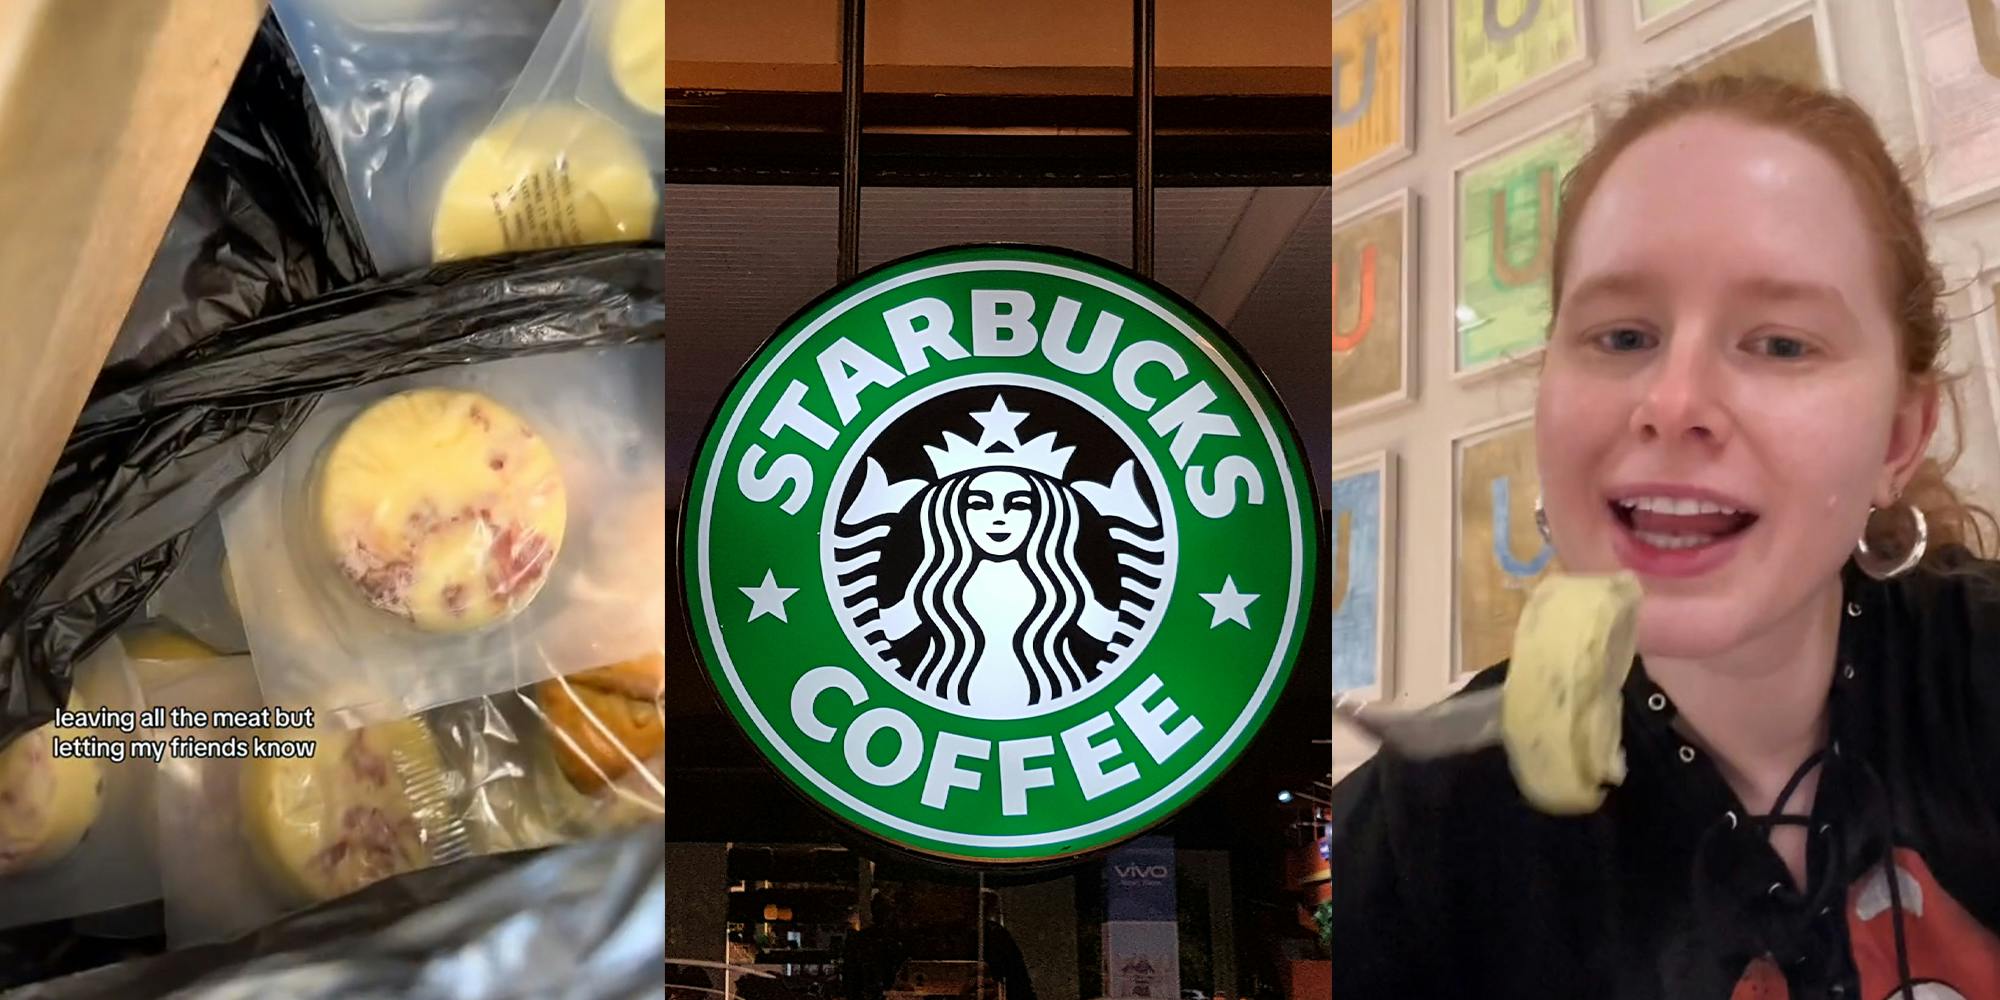 Dumpster-diver stocks up on food bites, whole bean coffee, and unused cups left behind closed down Starbucks